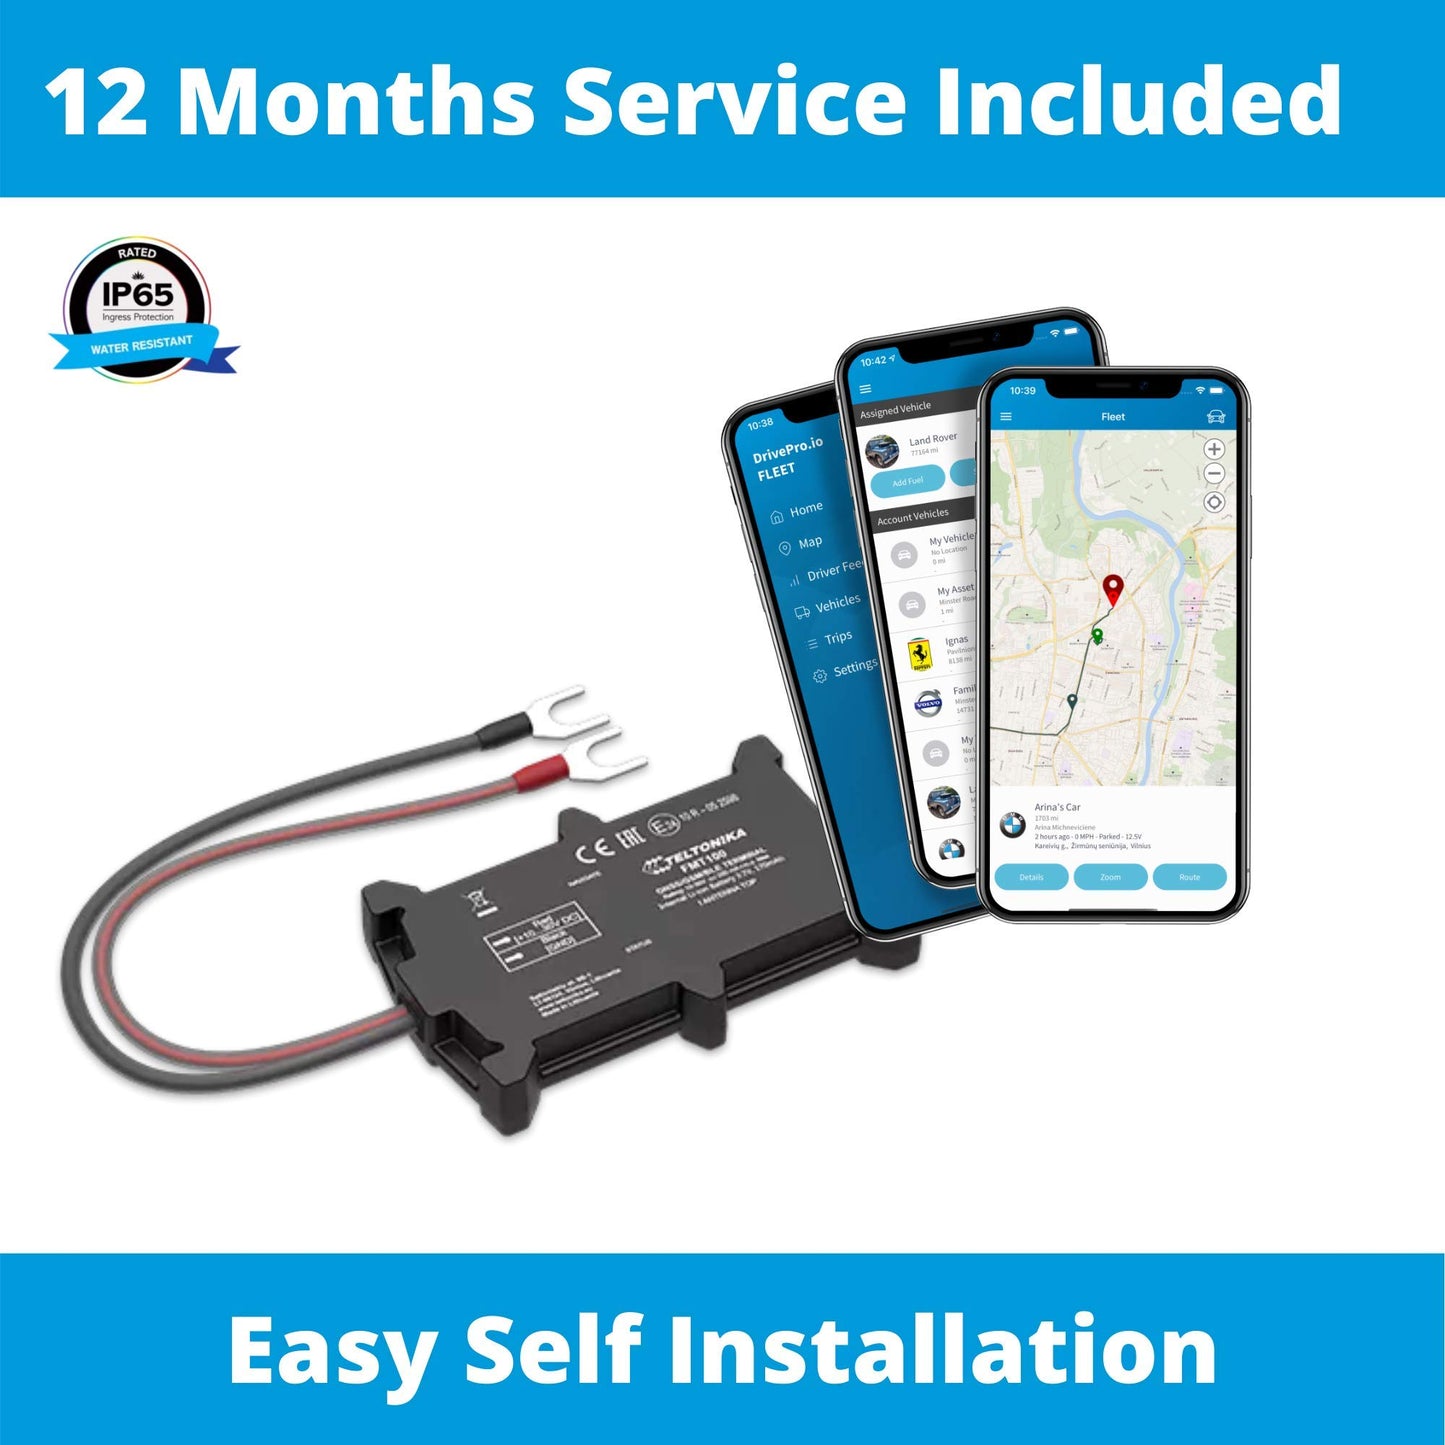 DrivePro.io Easy Fit GPS Tracker - 12 Months Pro Service Included